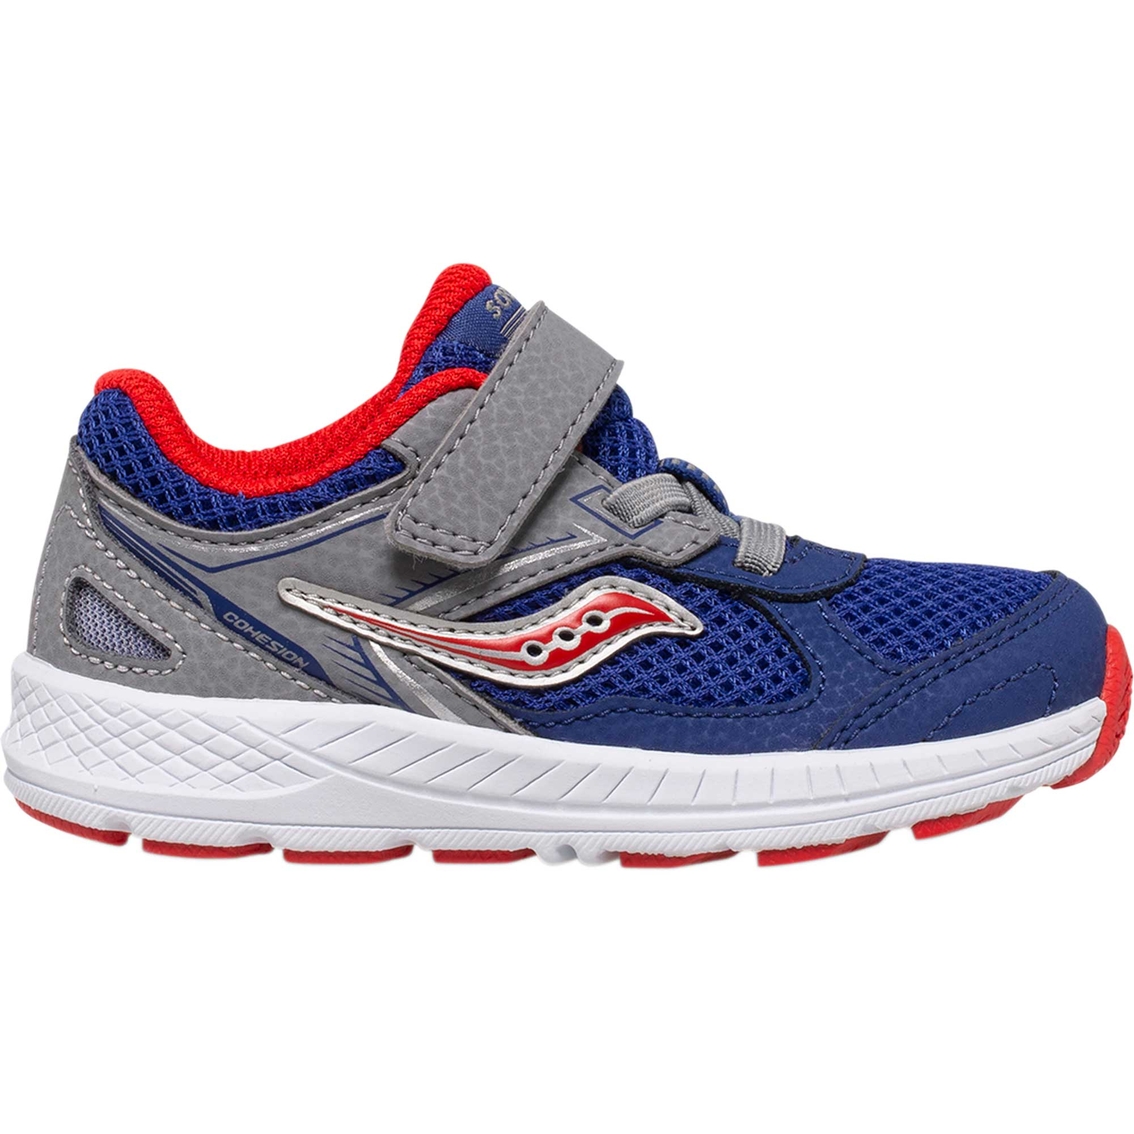 Saucony Boy's Cohesion 14 A/C Jr. Running Shoes - Image 2 of 5